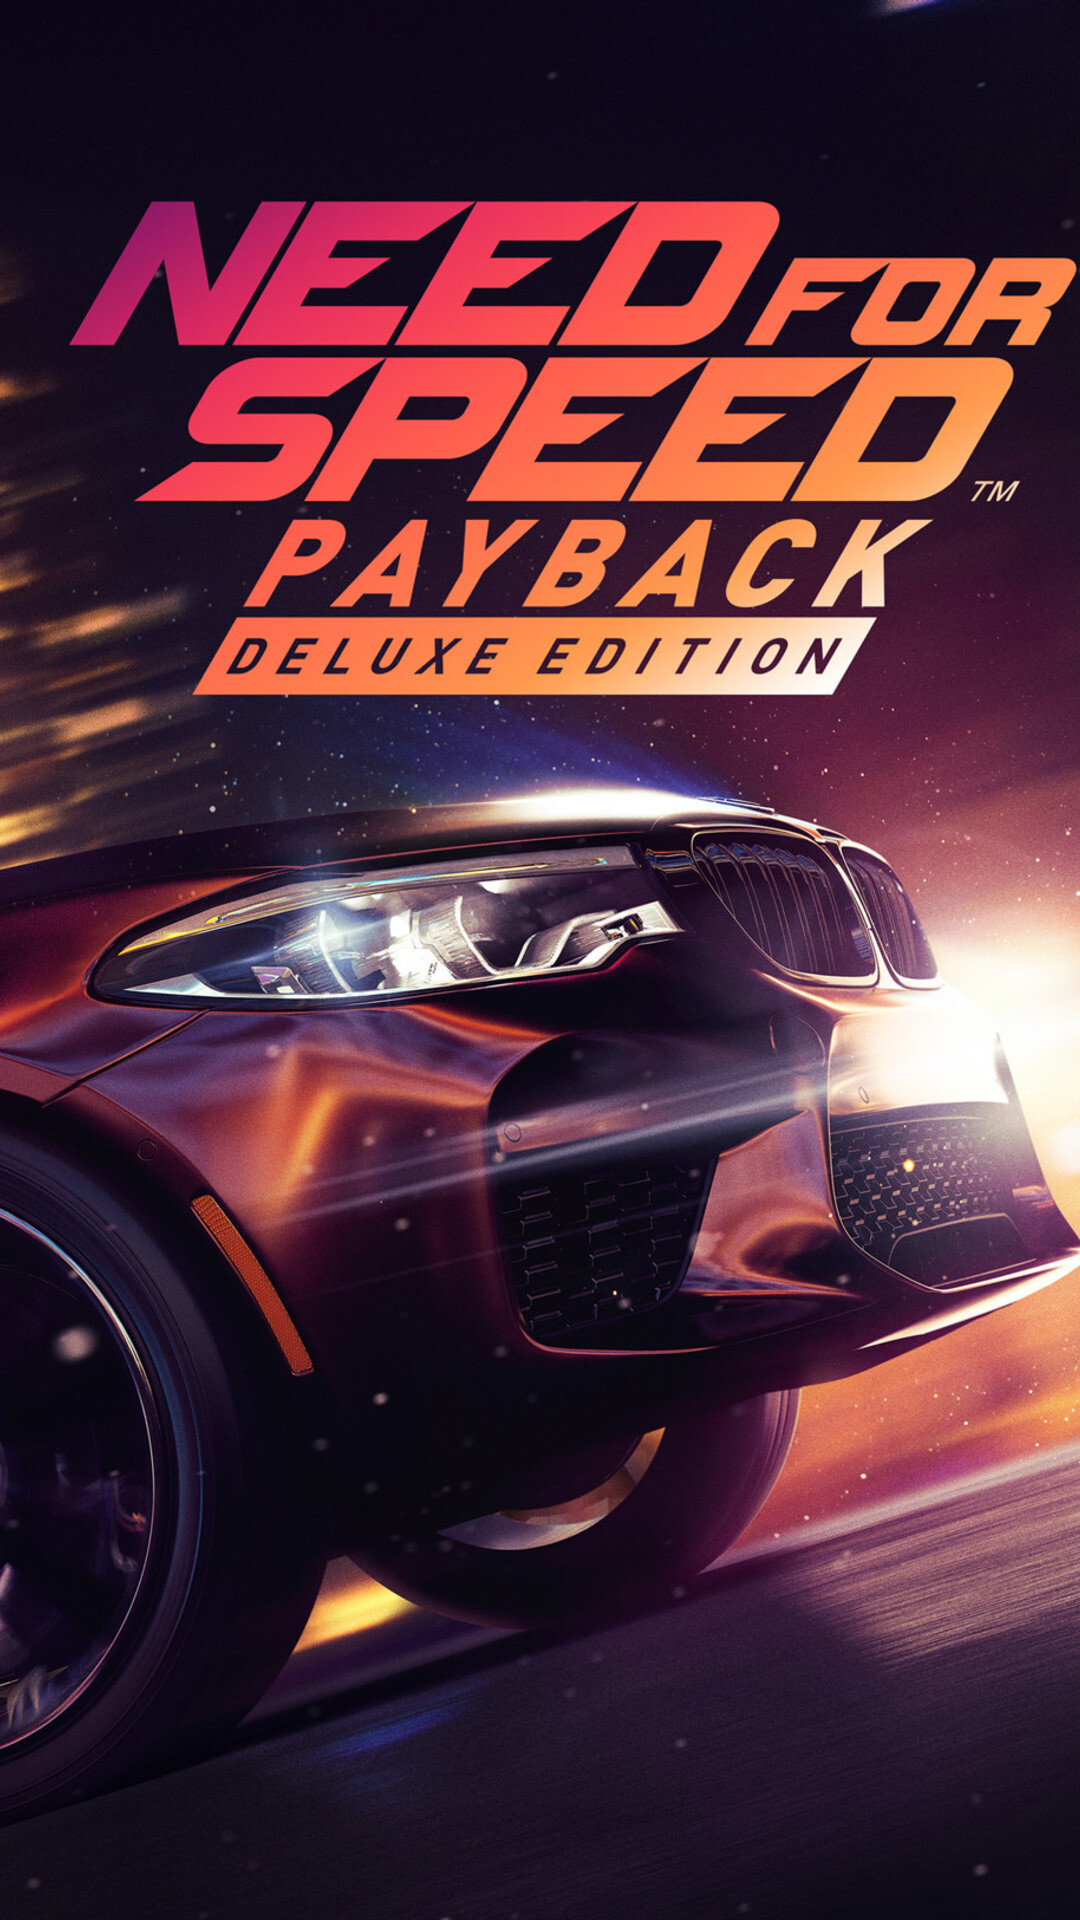 Need for Speed: NFS: Payback, Released worldwide on November 10, 2017. 1080x1920 Full HD Wallpaper.